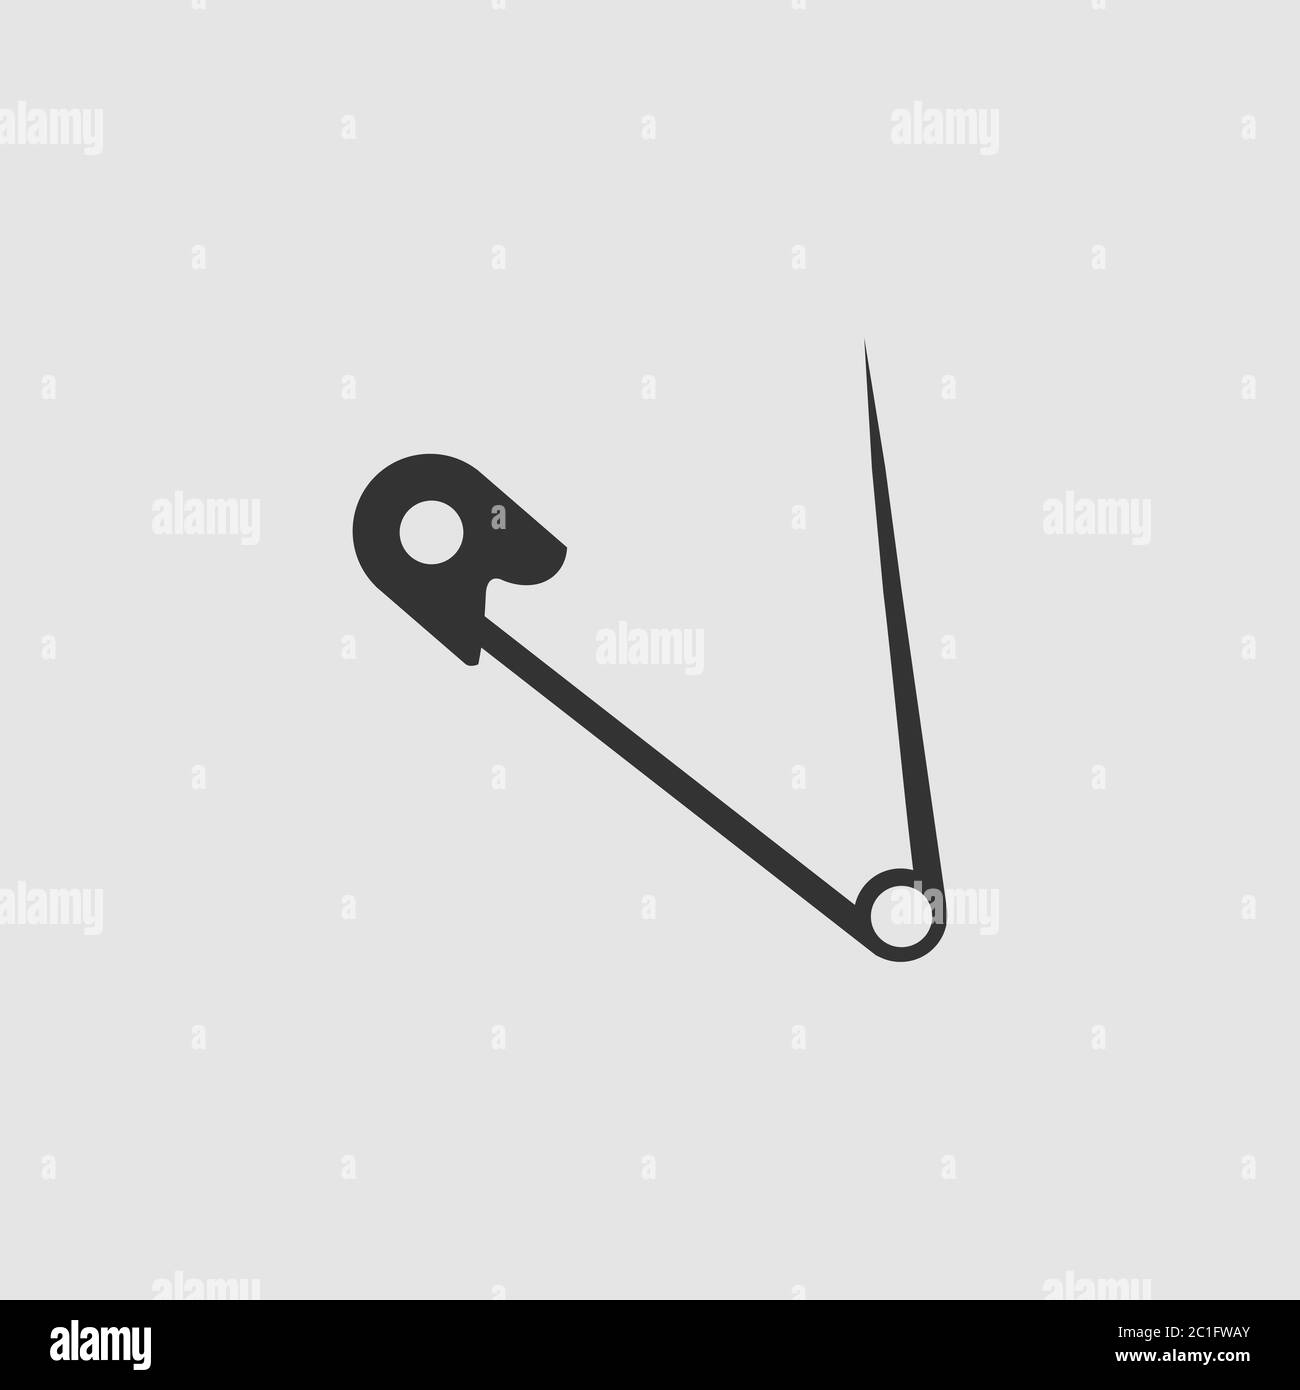 Safety pin Black and White Stock Photos & Images - Alamy